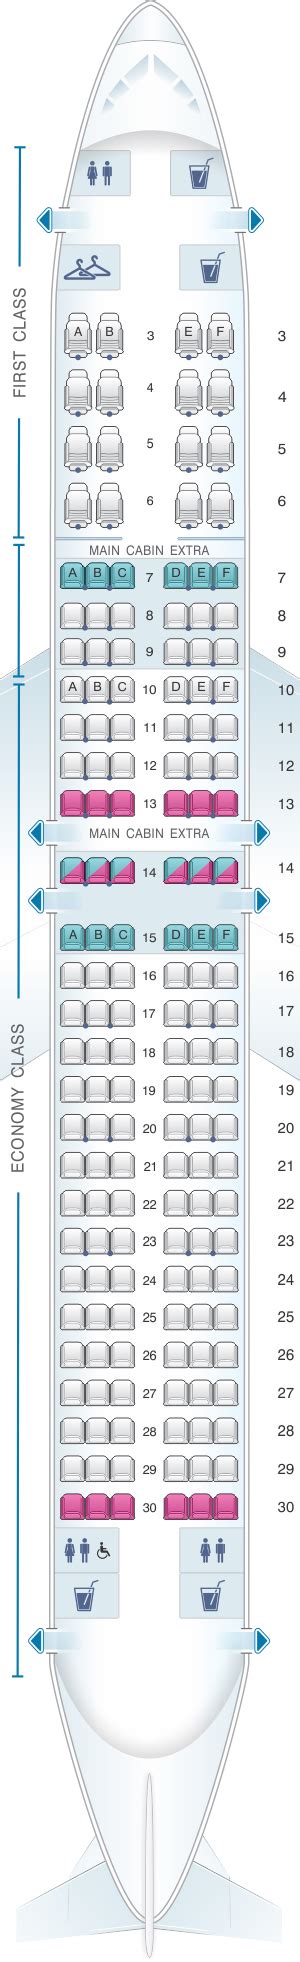 Seat count Seat pitch Seat width Wi-Fi ... Boeing 737-800 a